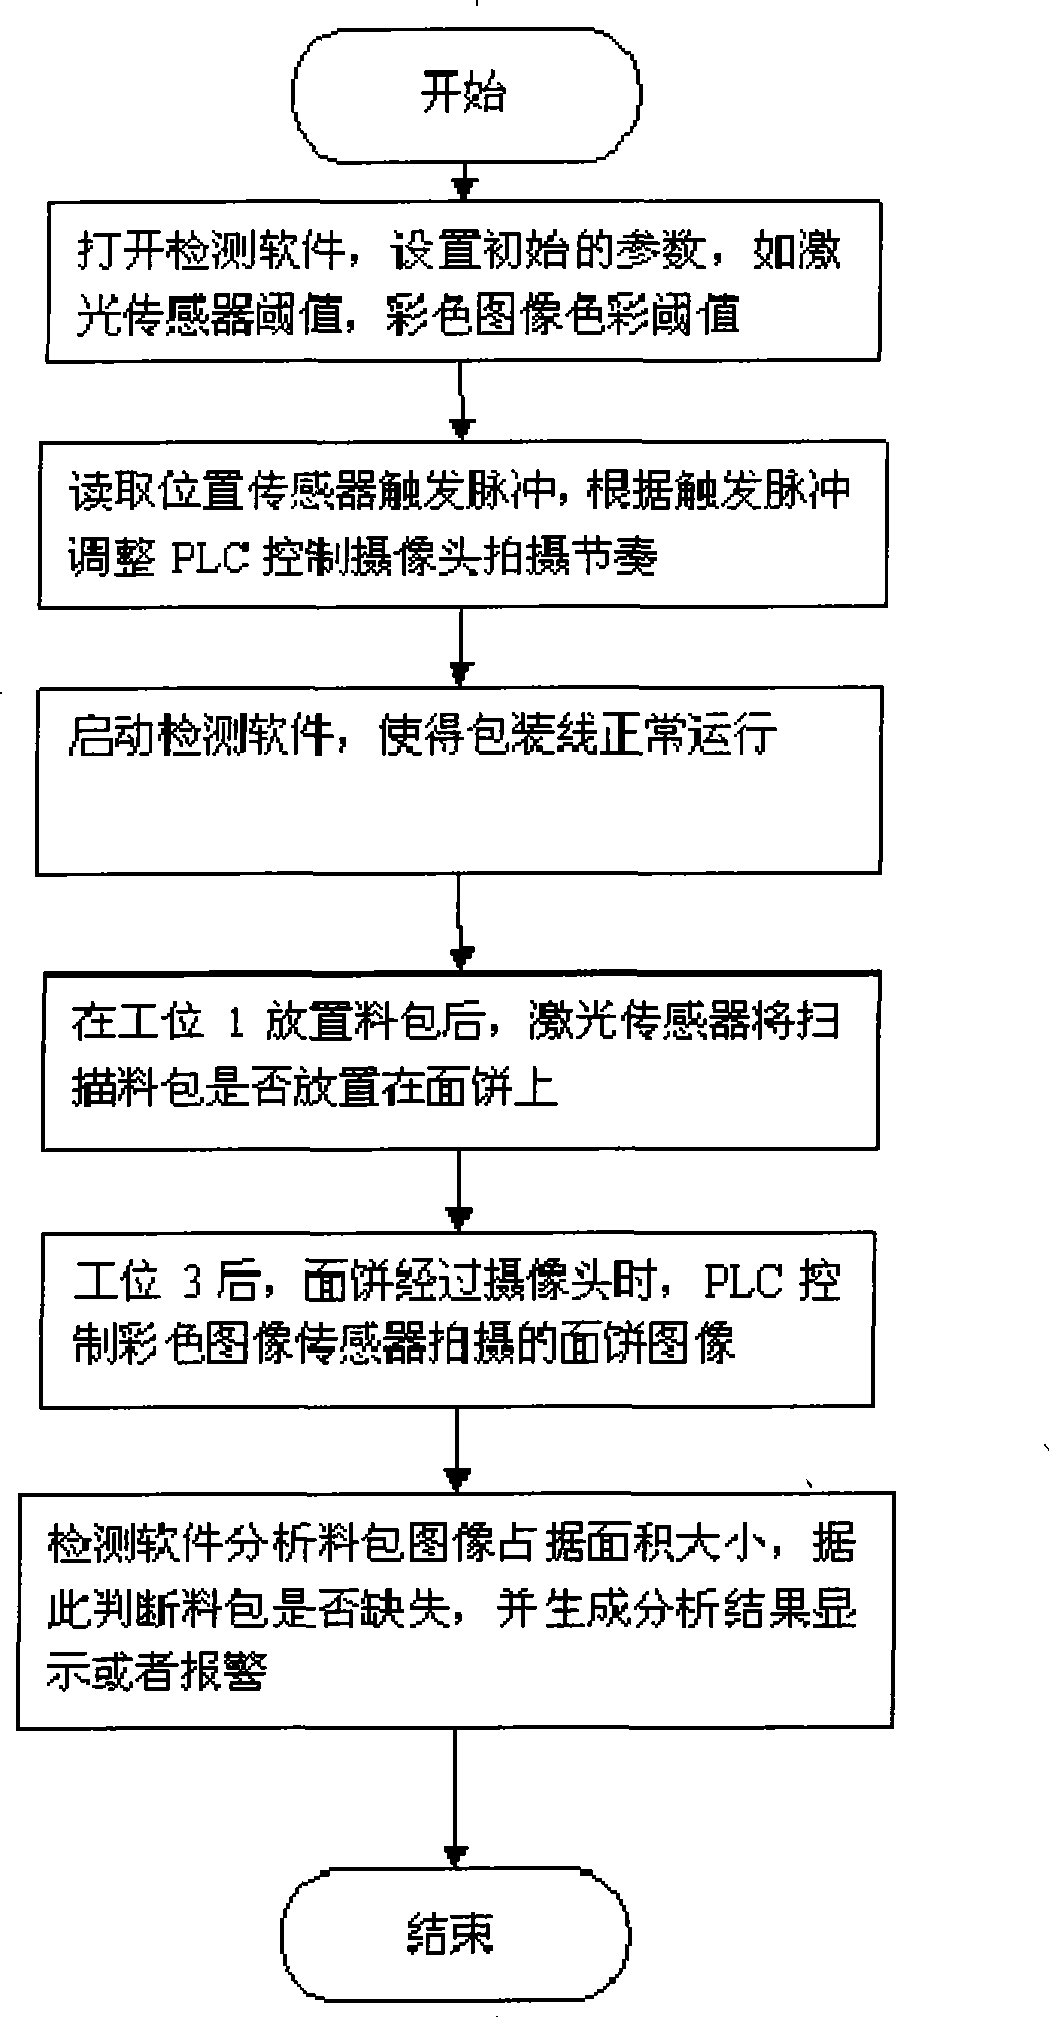 Machine vision-based instant noodle seasoning packet automatic detection instrument and method